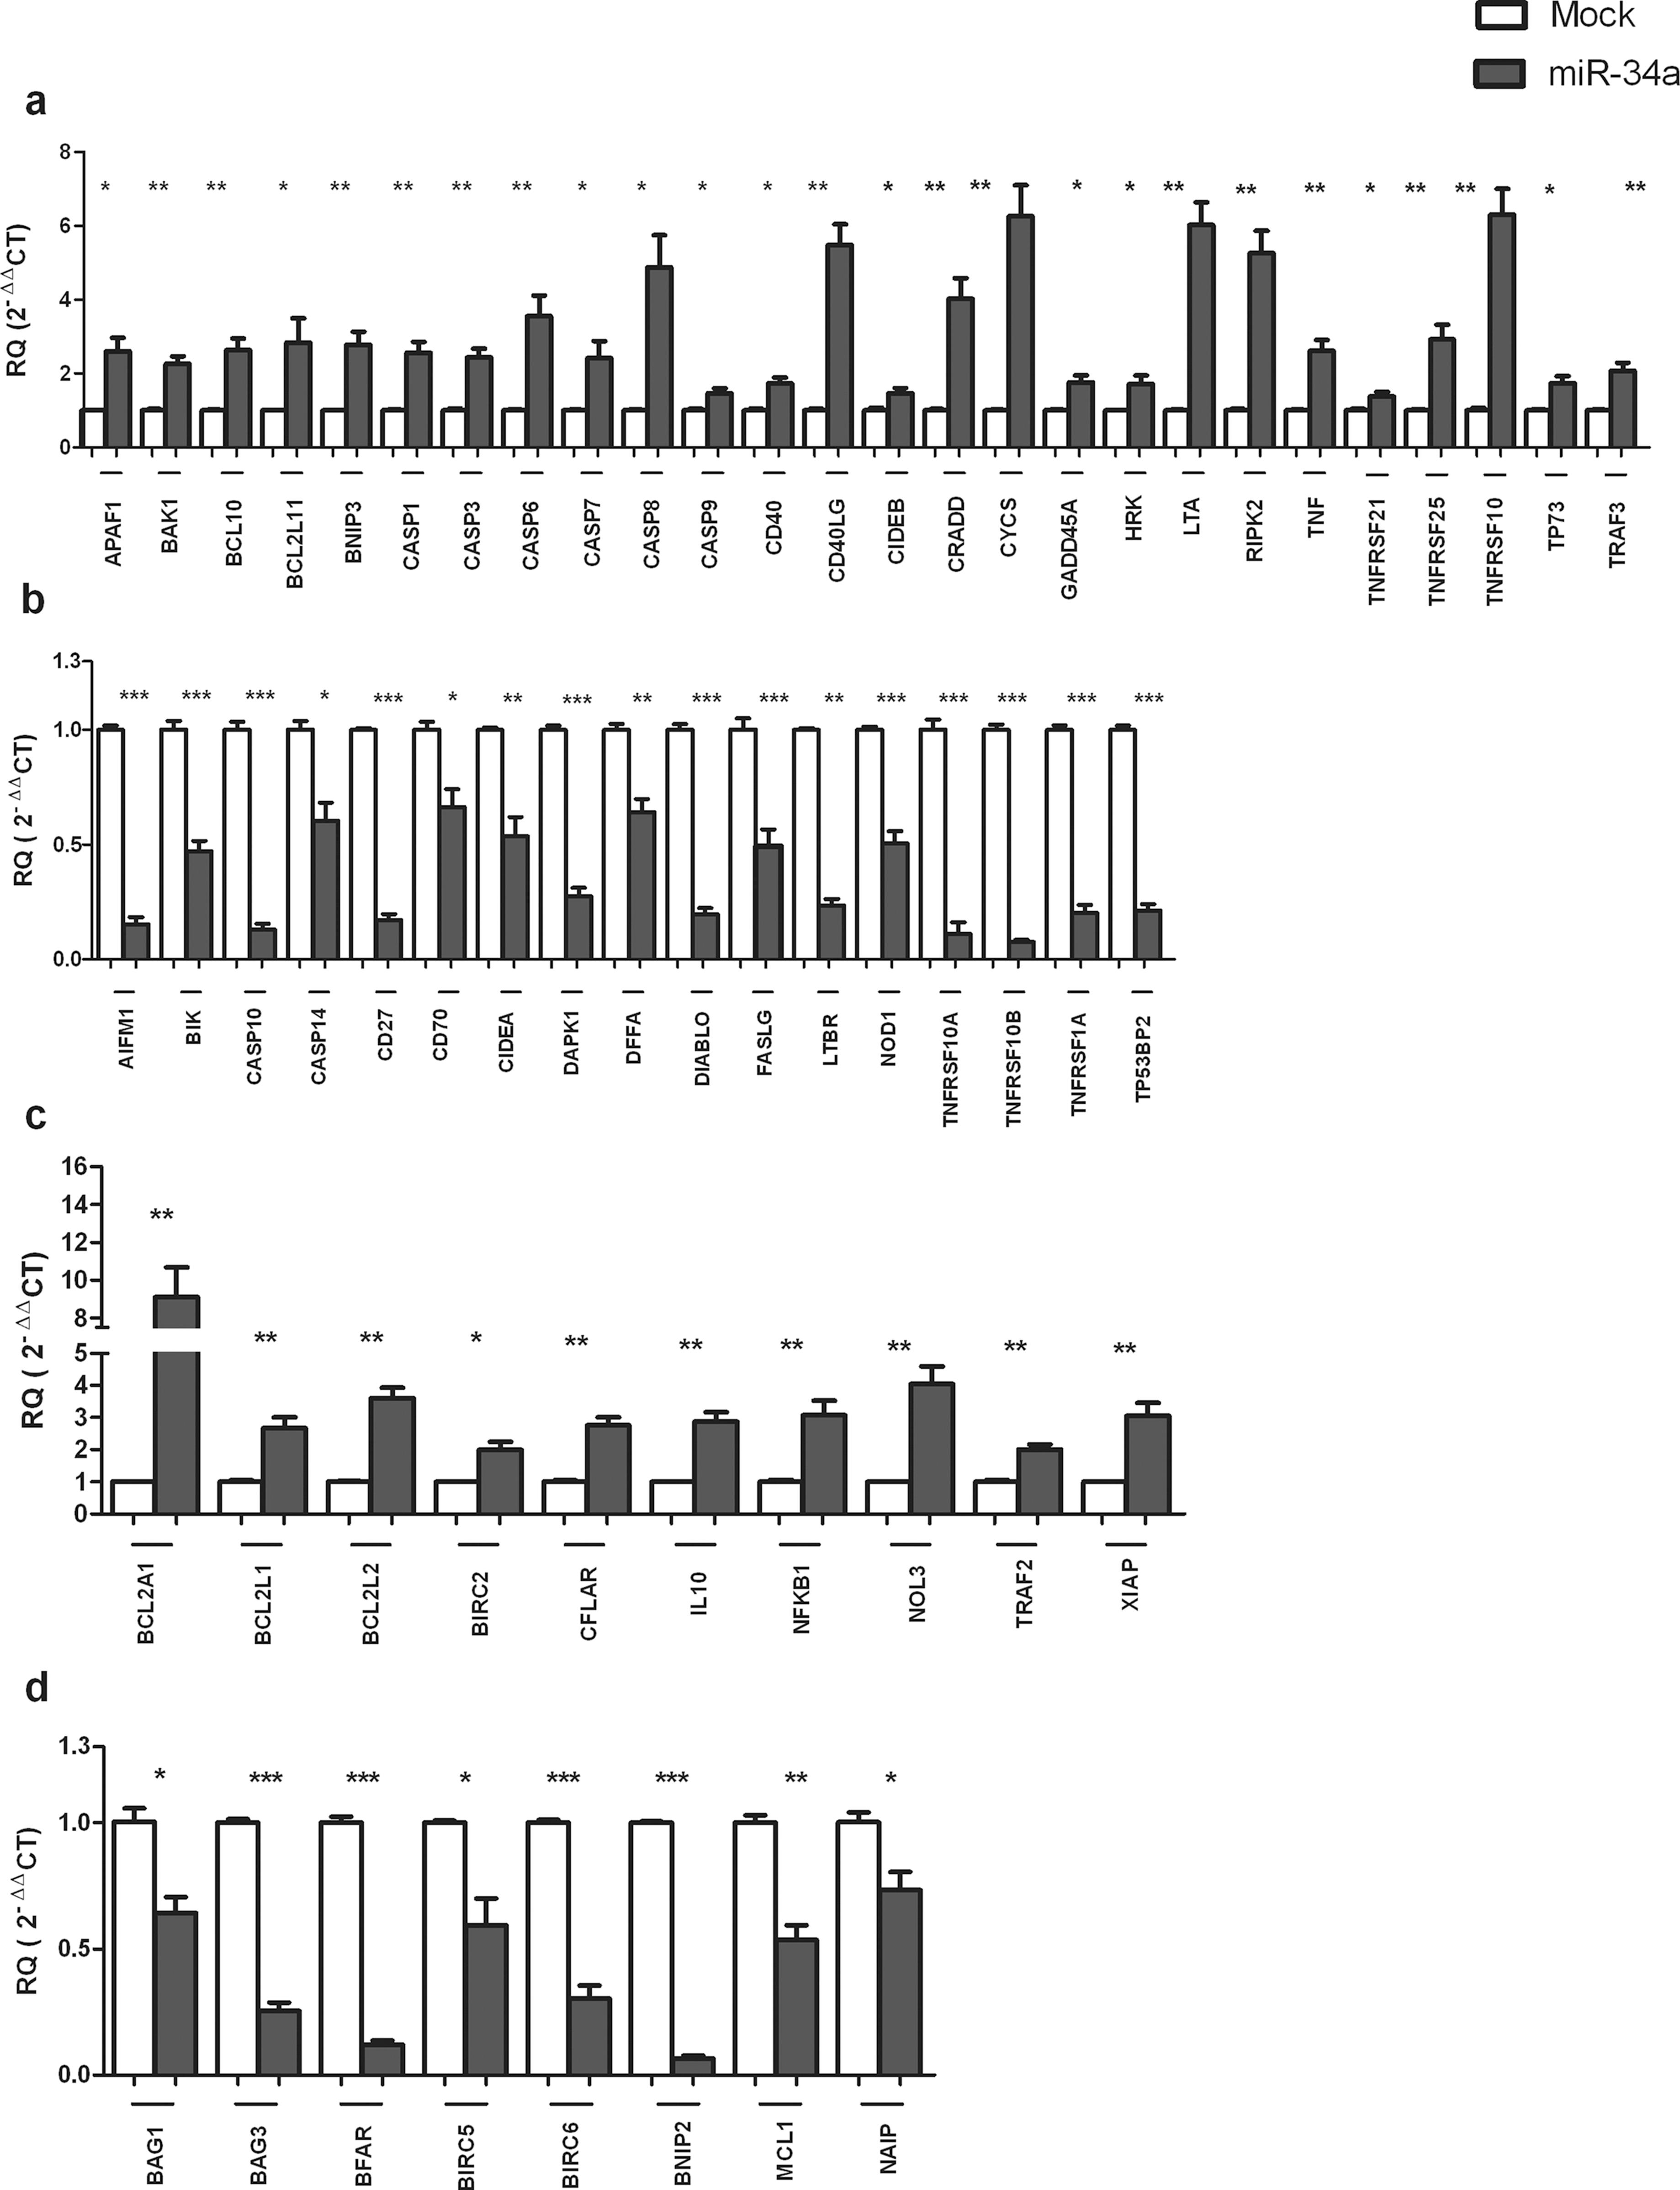 Impact of miR-34a on the expression of pro-apoptotic and anti-apoptotic genes.